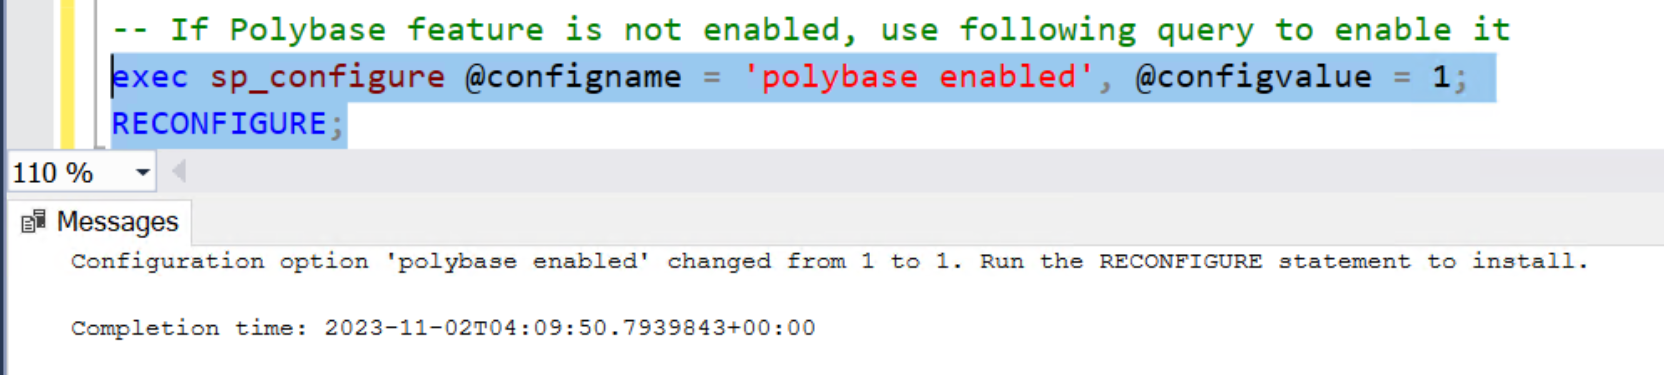 This is an example of how to enable polybase